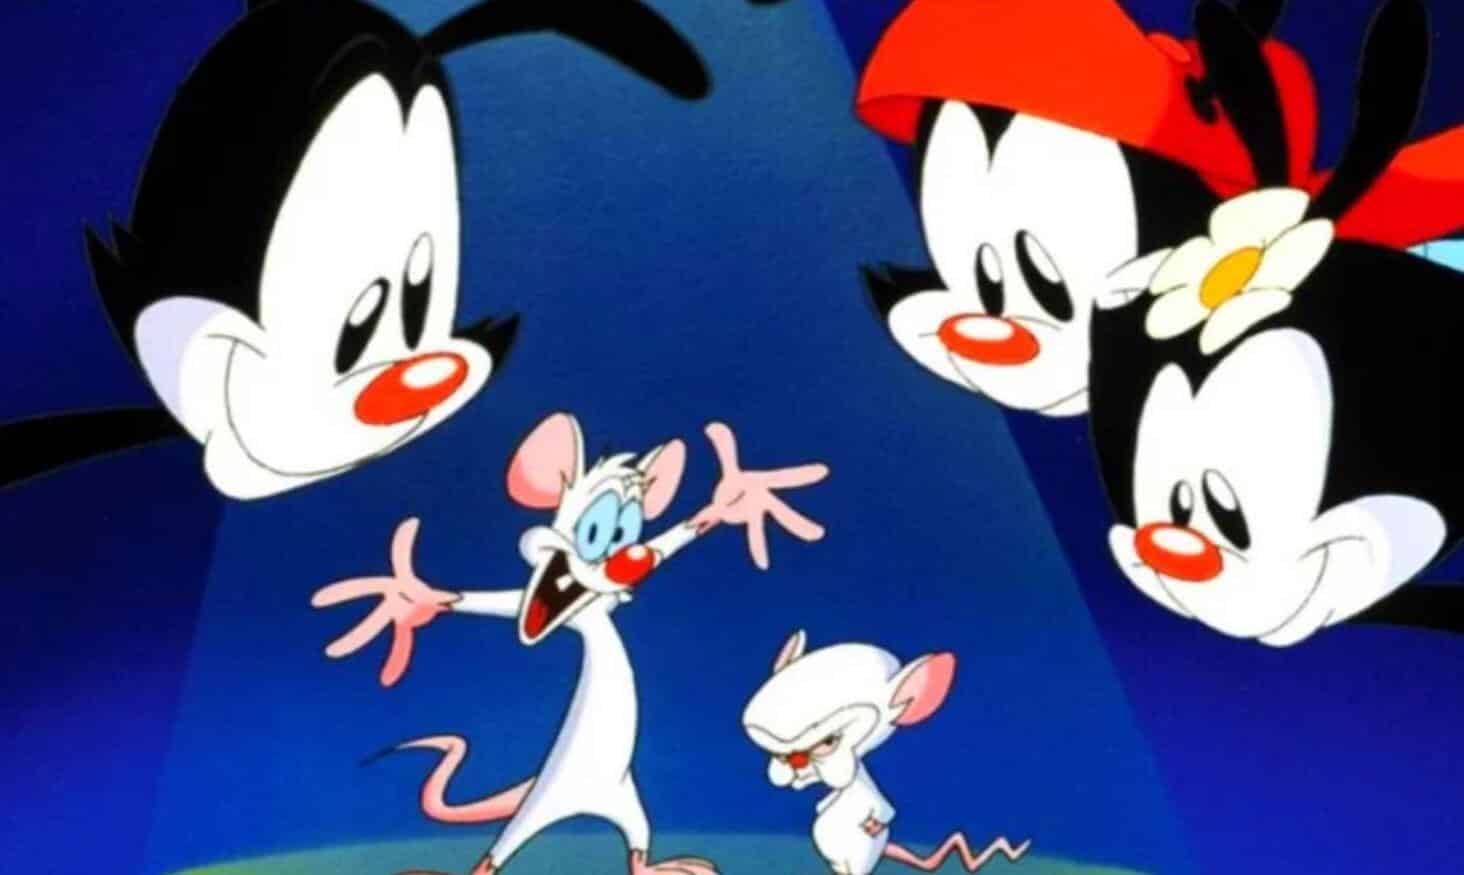 download animaniacs pinky and the brain